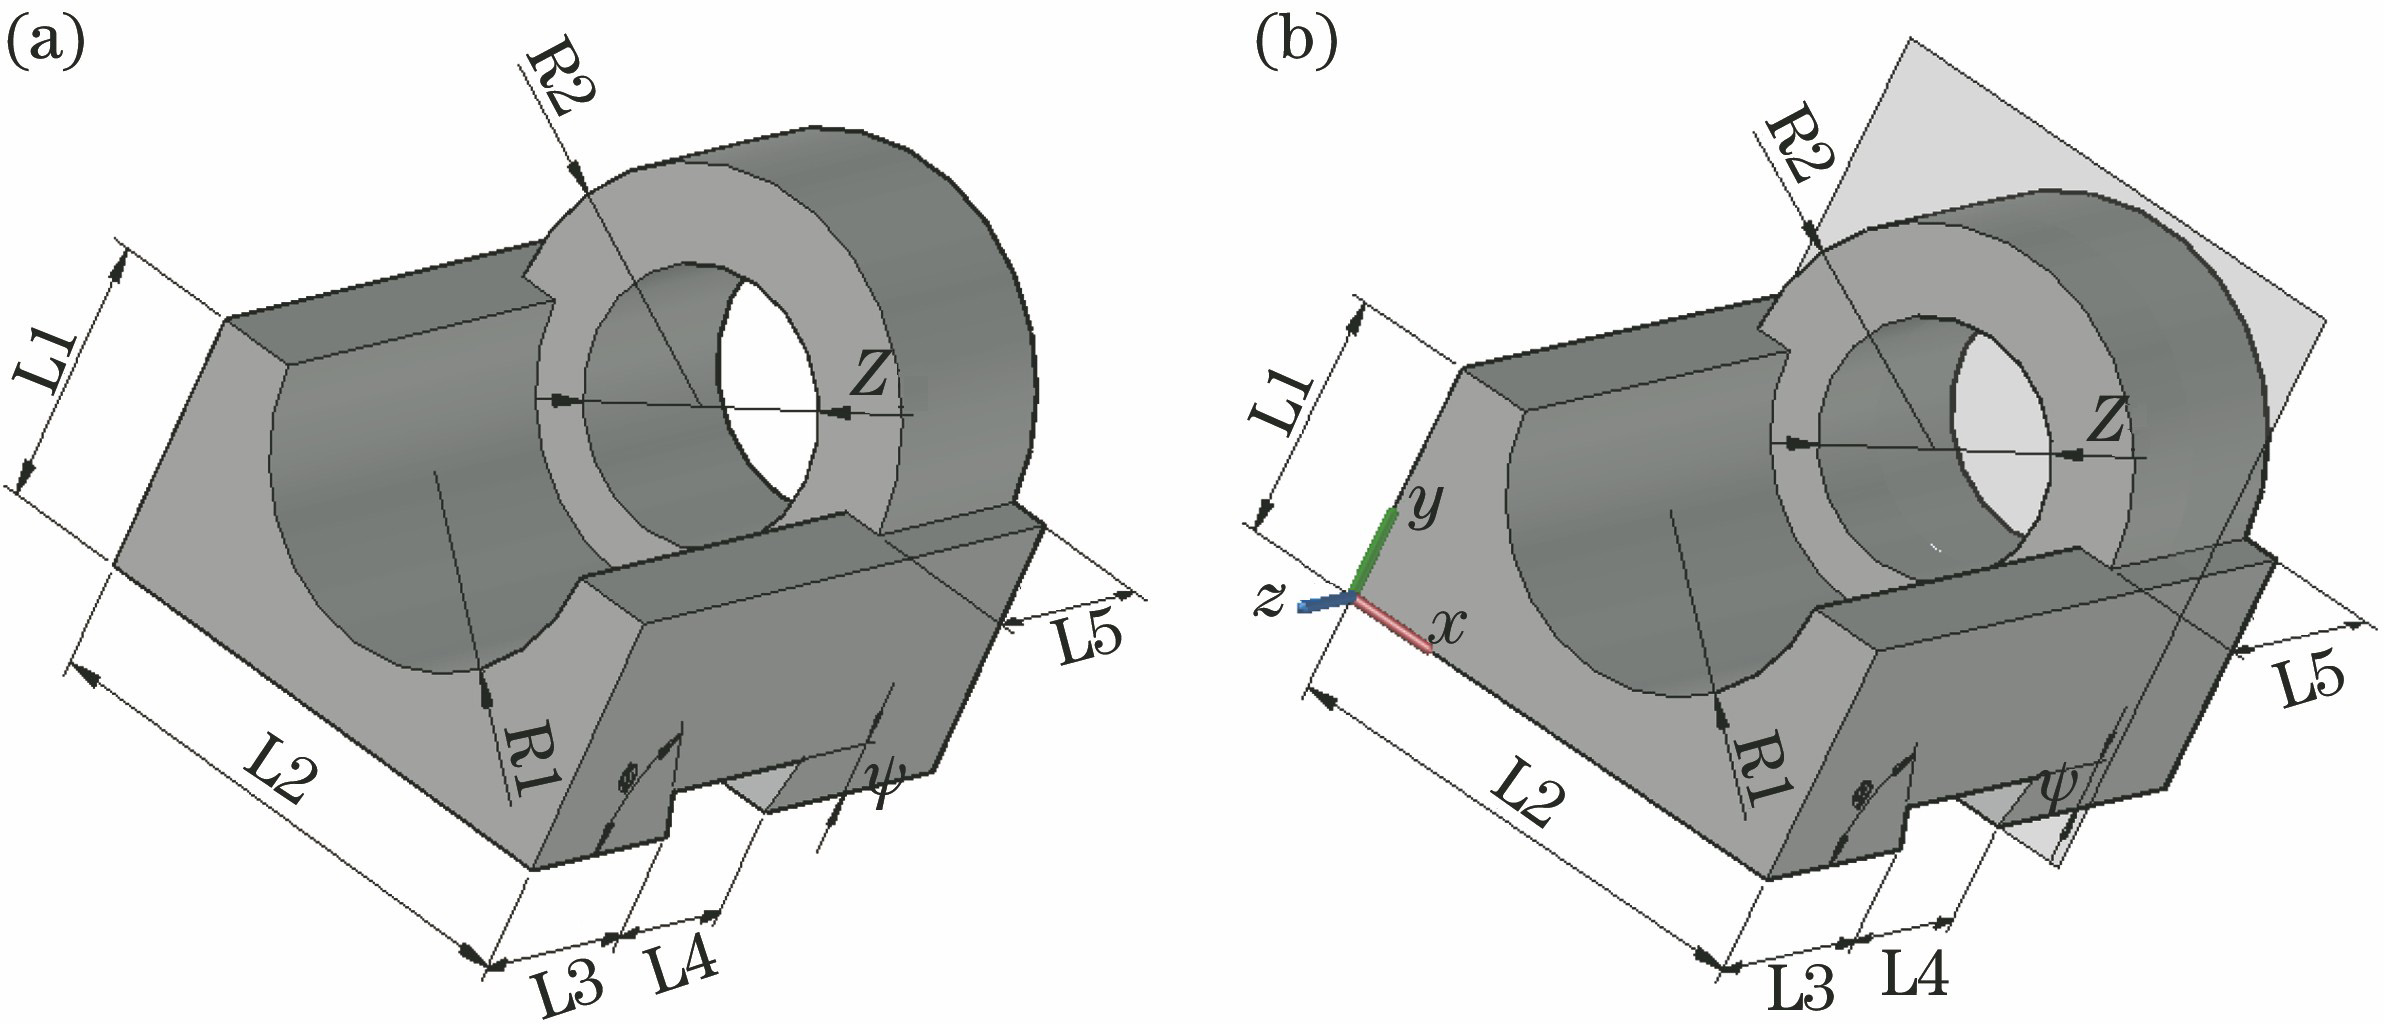 CAD model of object and schematic of section. (a) CAD model; (b) section